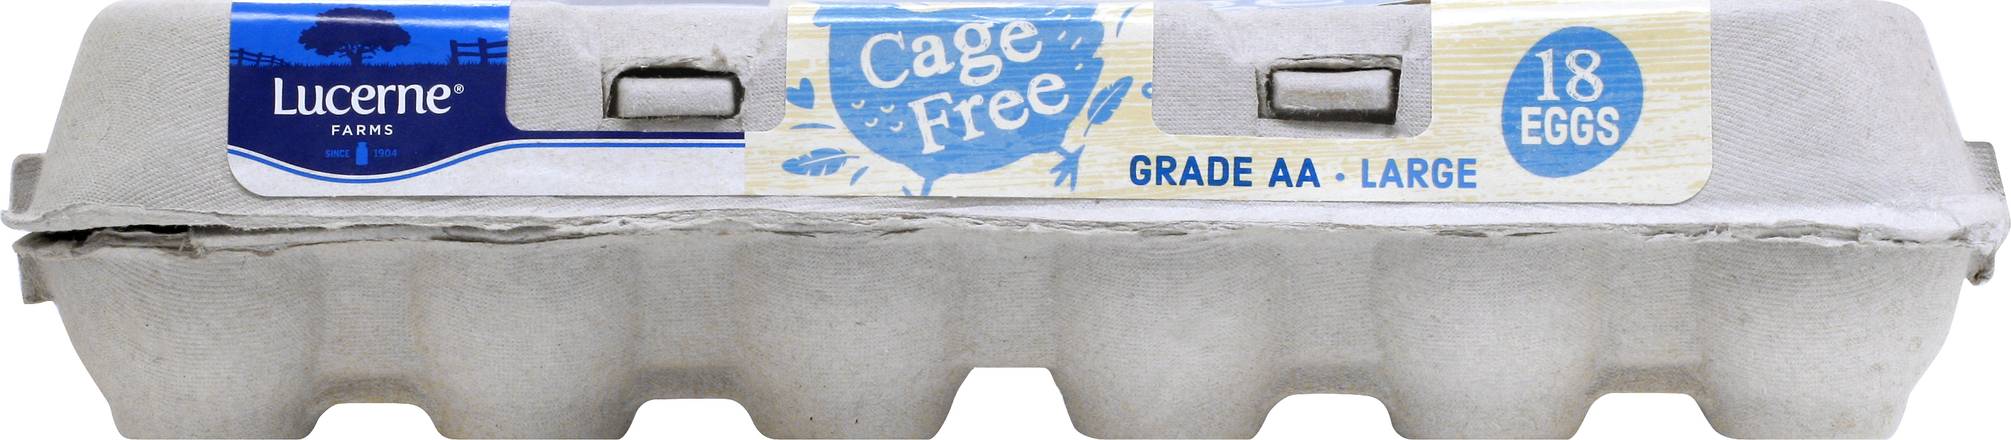 Lucerne Cage Free Grade Aa Large Eggs (18 ct)